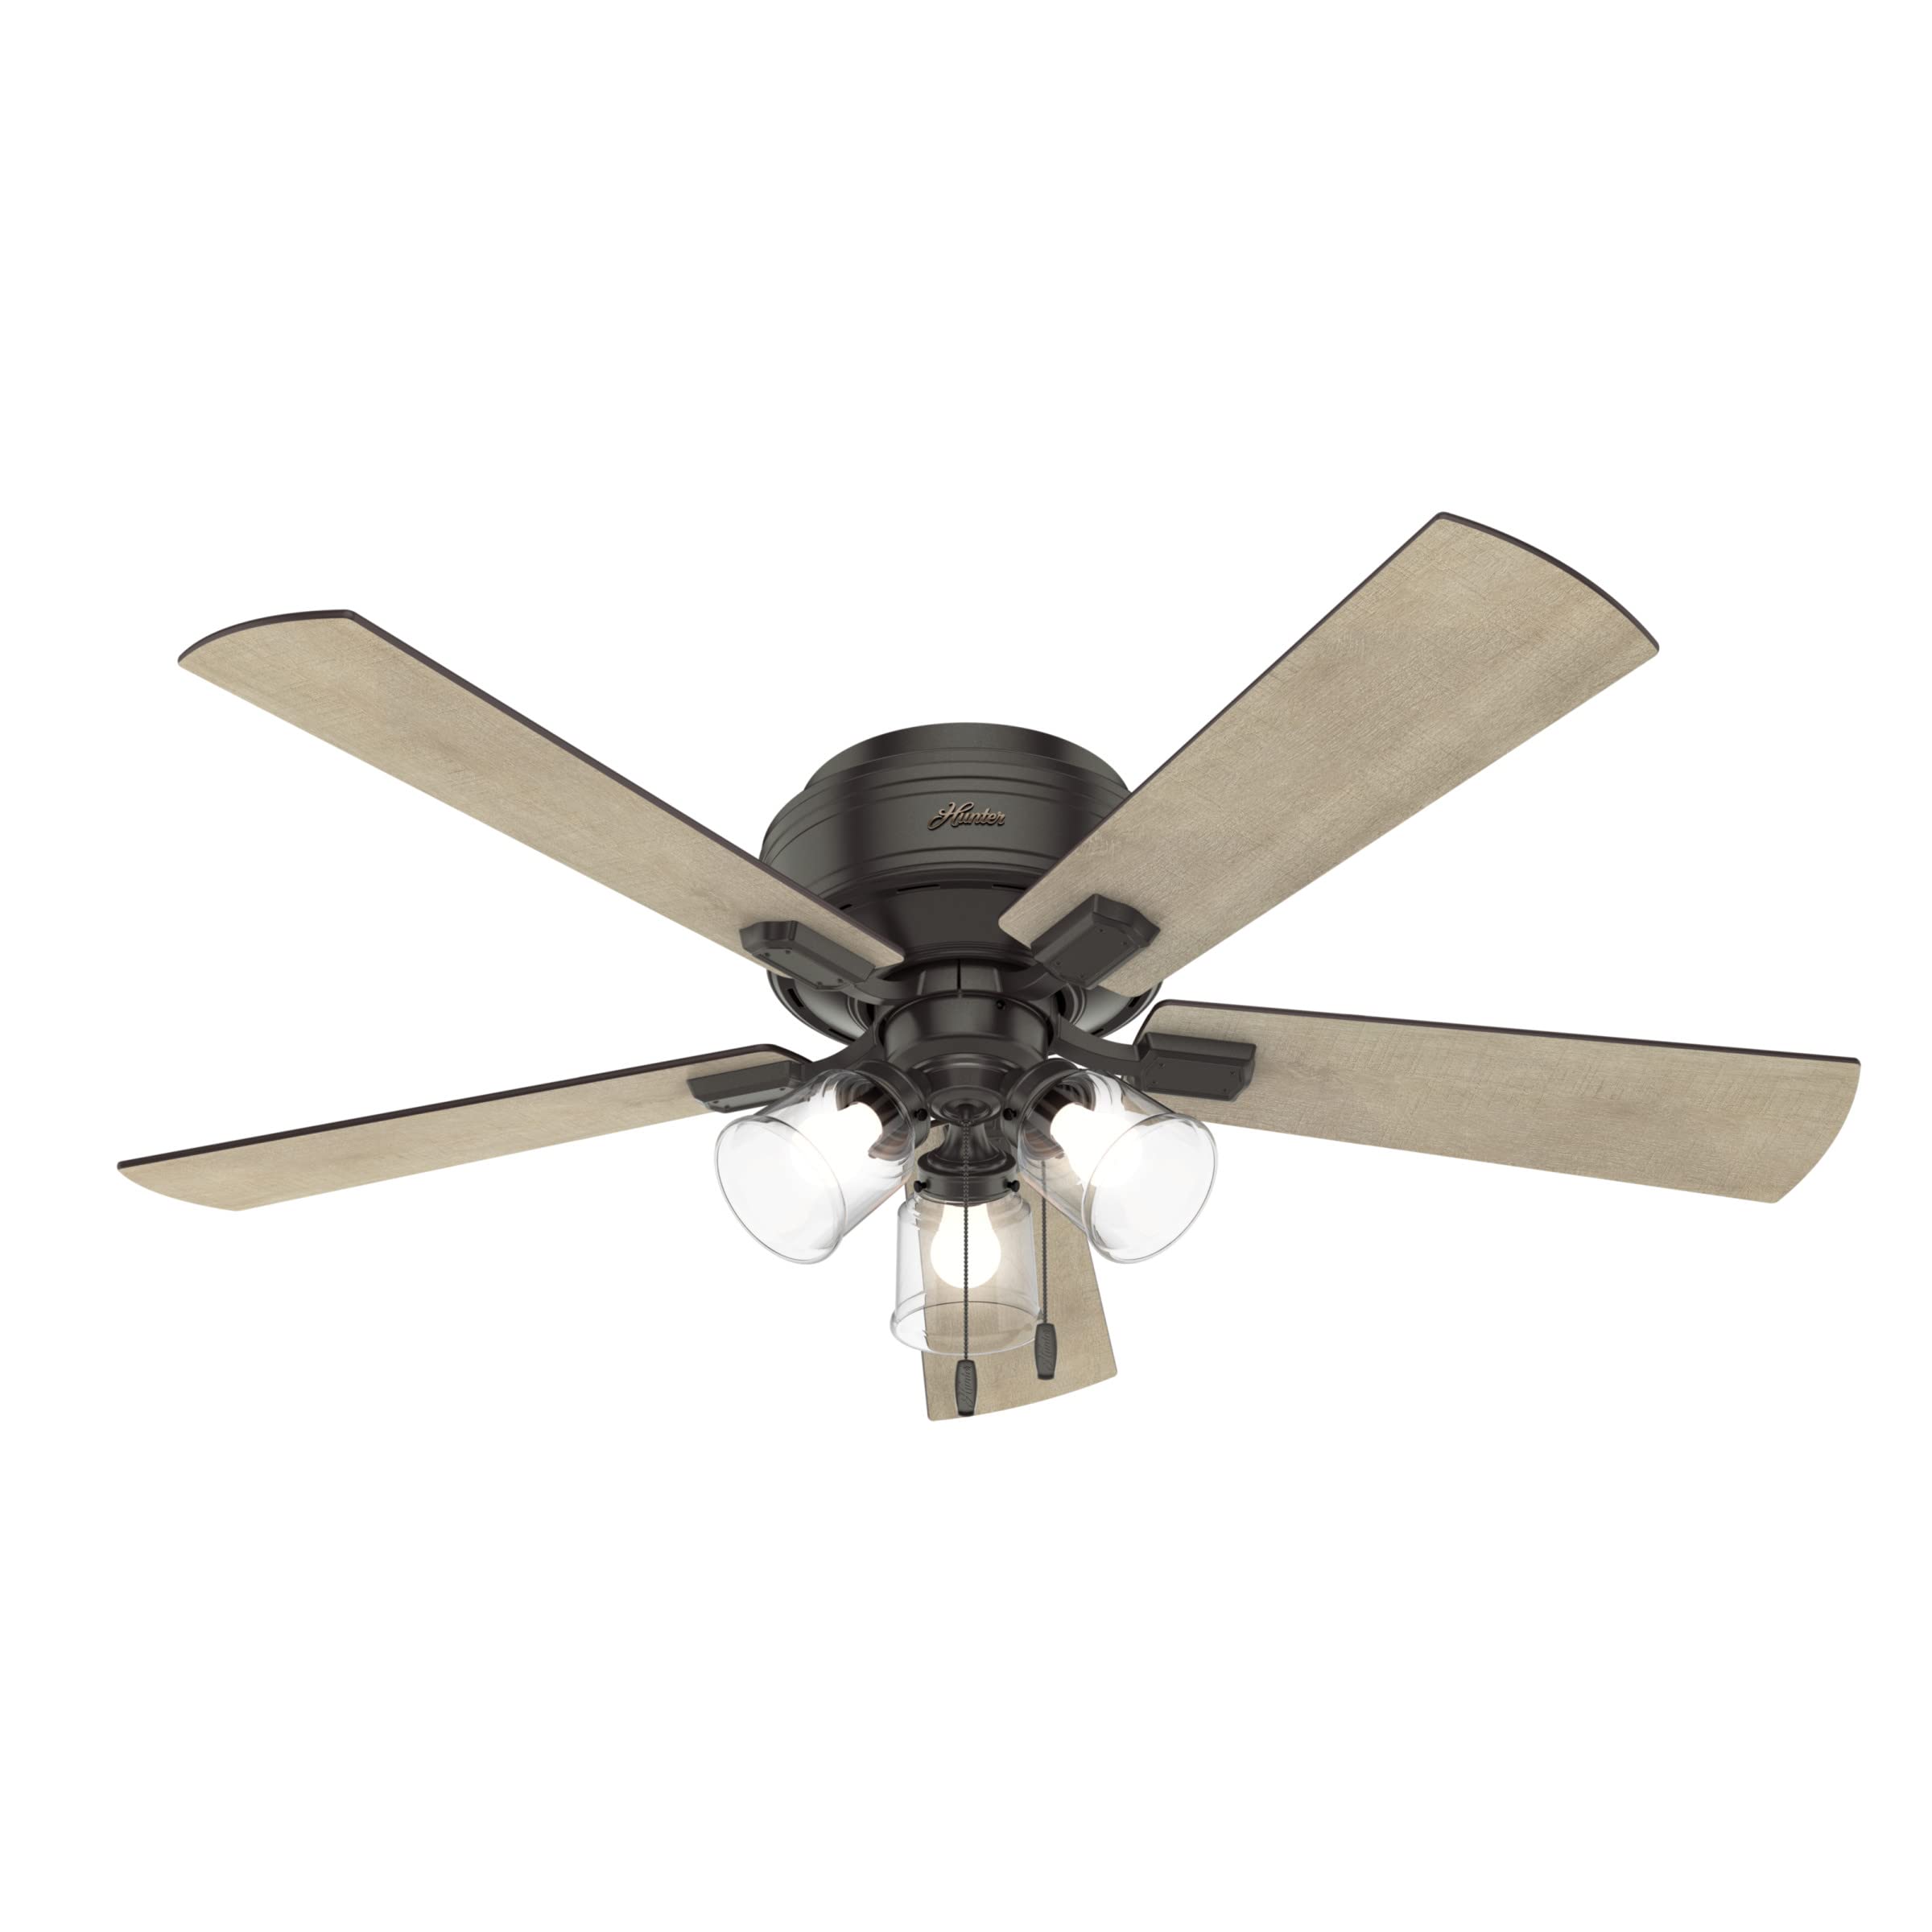 Hunter Crestfield Indoor Low Profile Ceiling Fan with LED Light and Pull Chain Control, 52